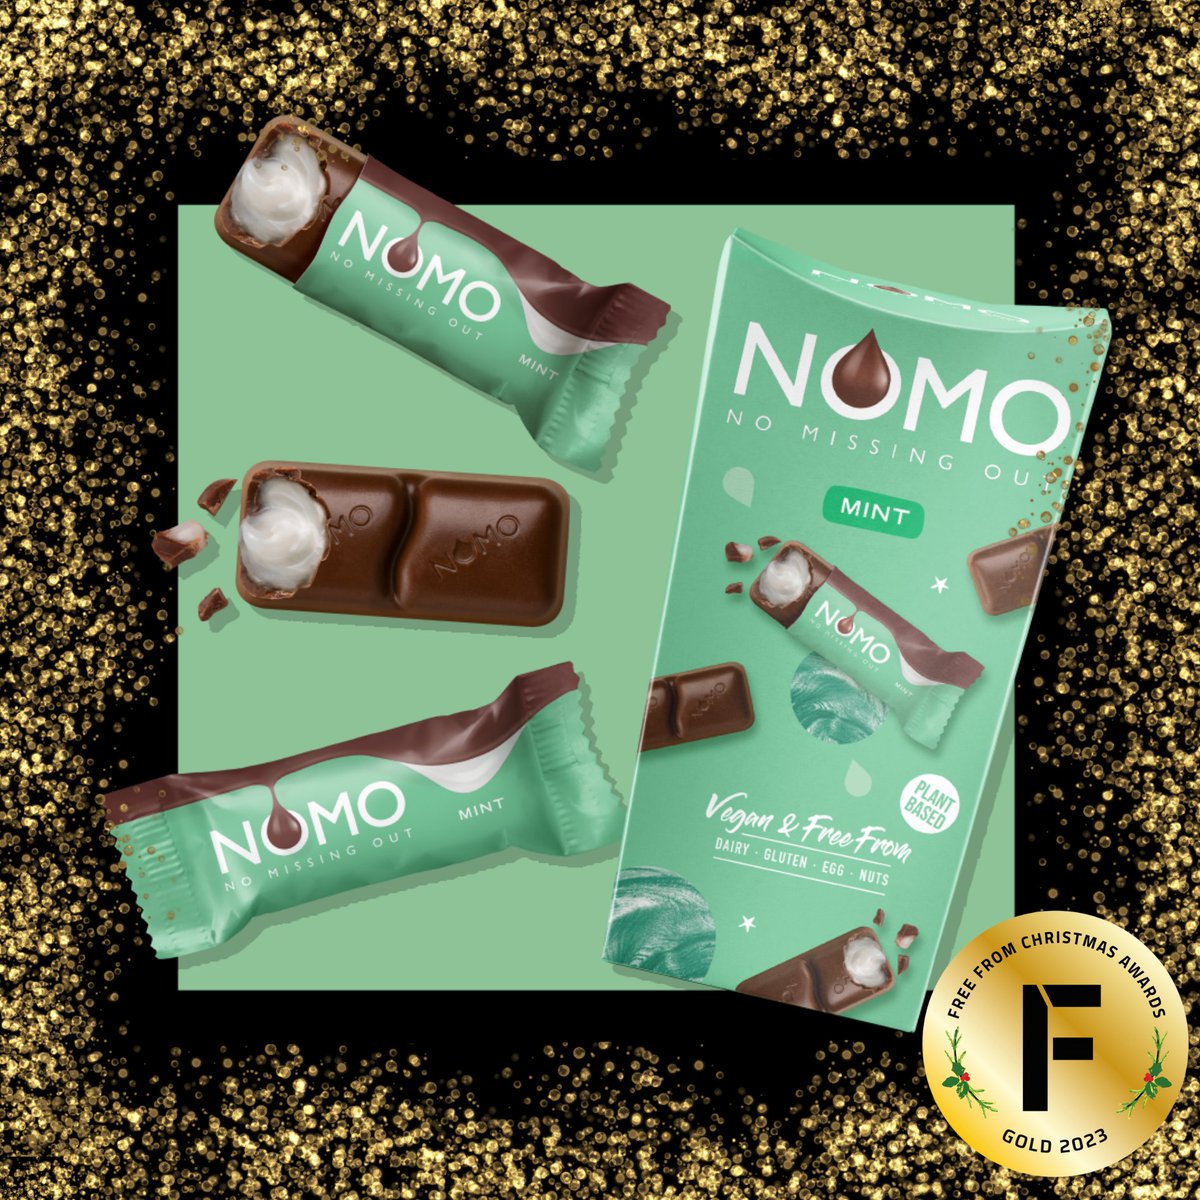 🏅 Gold to @nomochocolate Mint Sharing Box “I loved After Eight Mints and have missed them so much being on a dairy free diet. I was beyond excited when I snapped this open and even more amazed when I tasted it. Just incredible.” #FFCA23